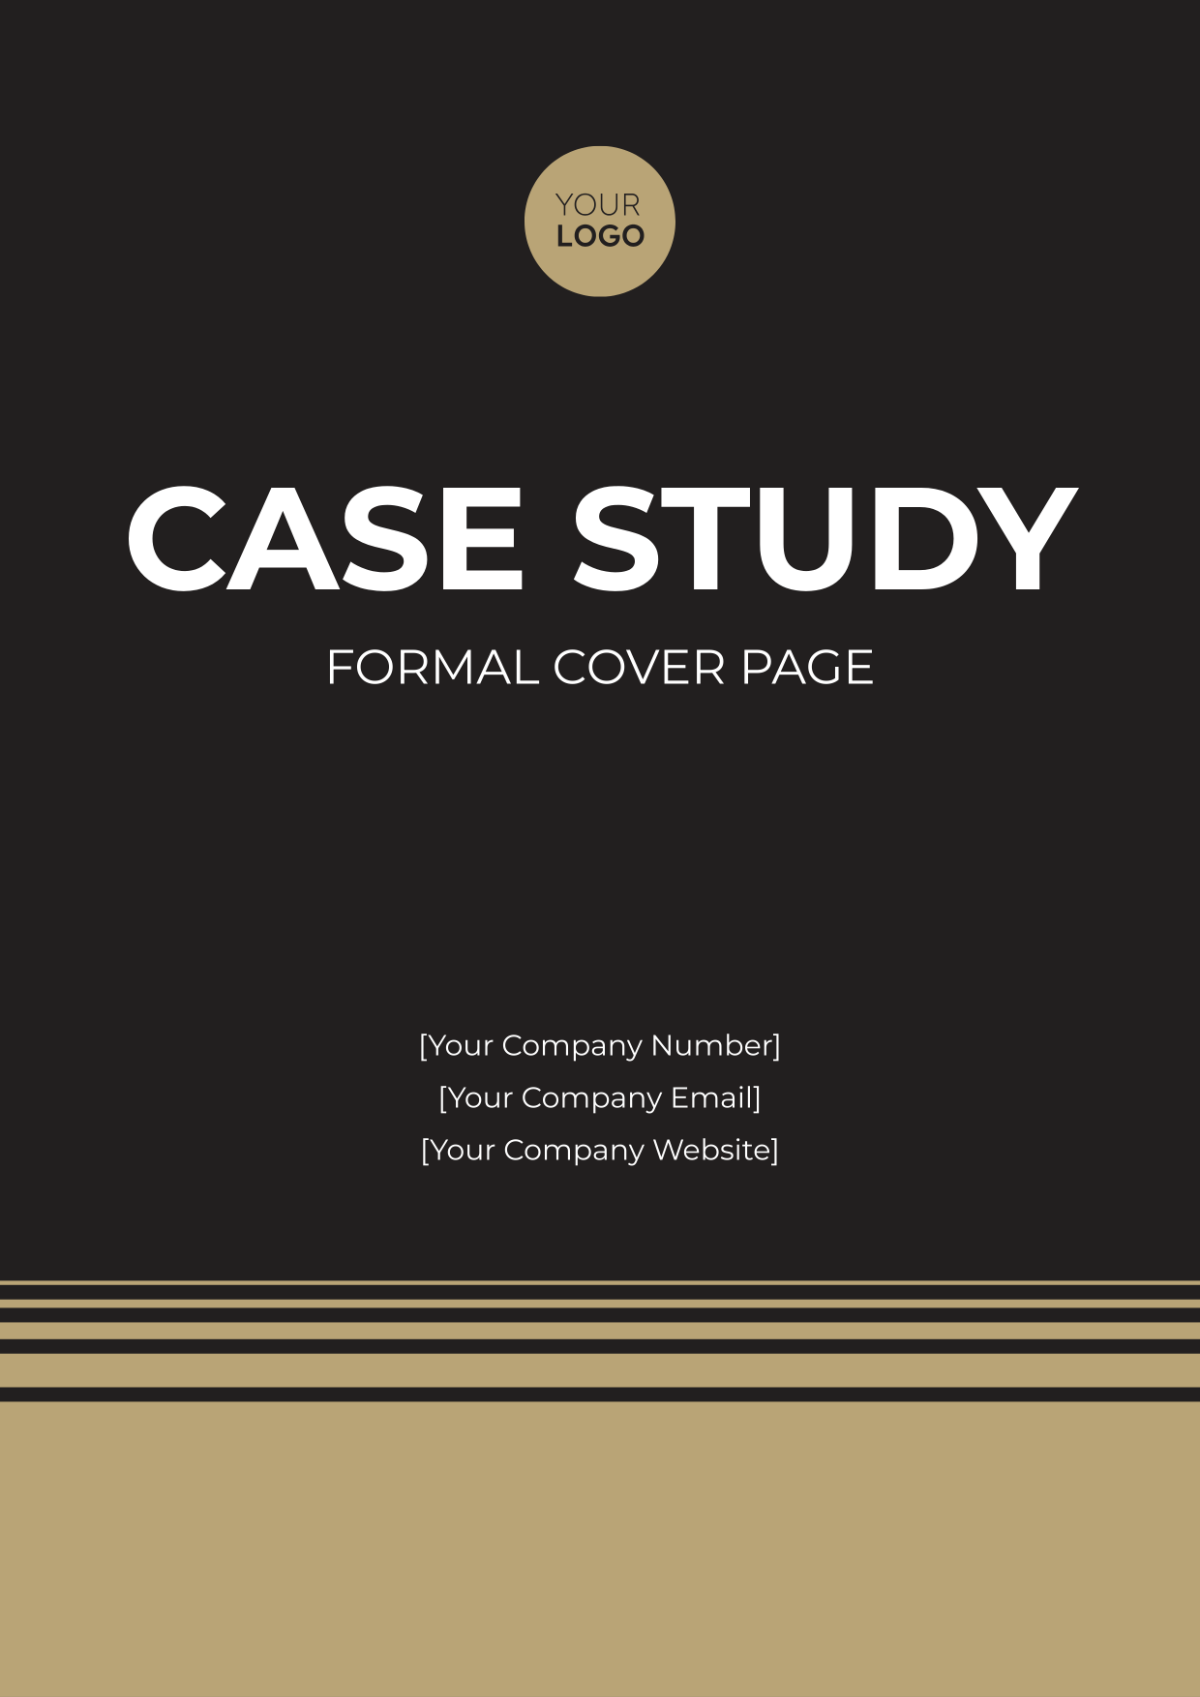 Case Study Formal Cover Page Template